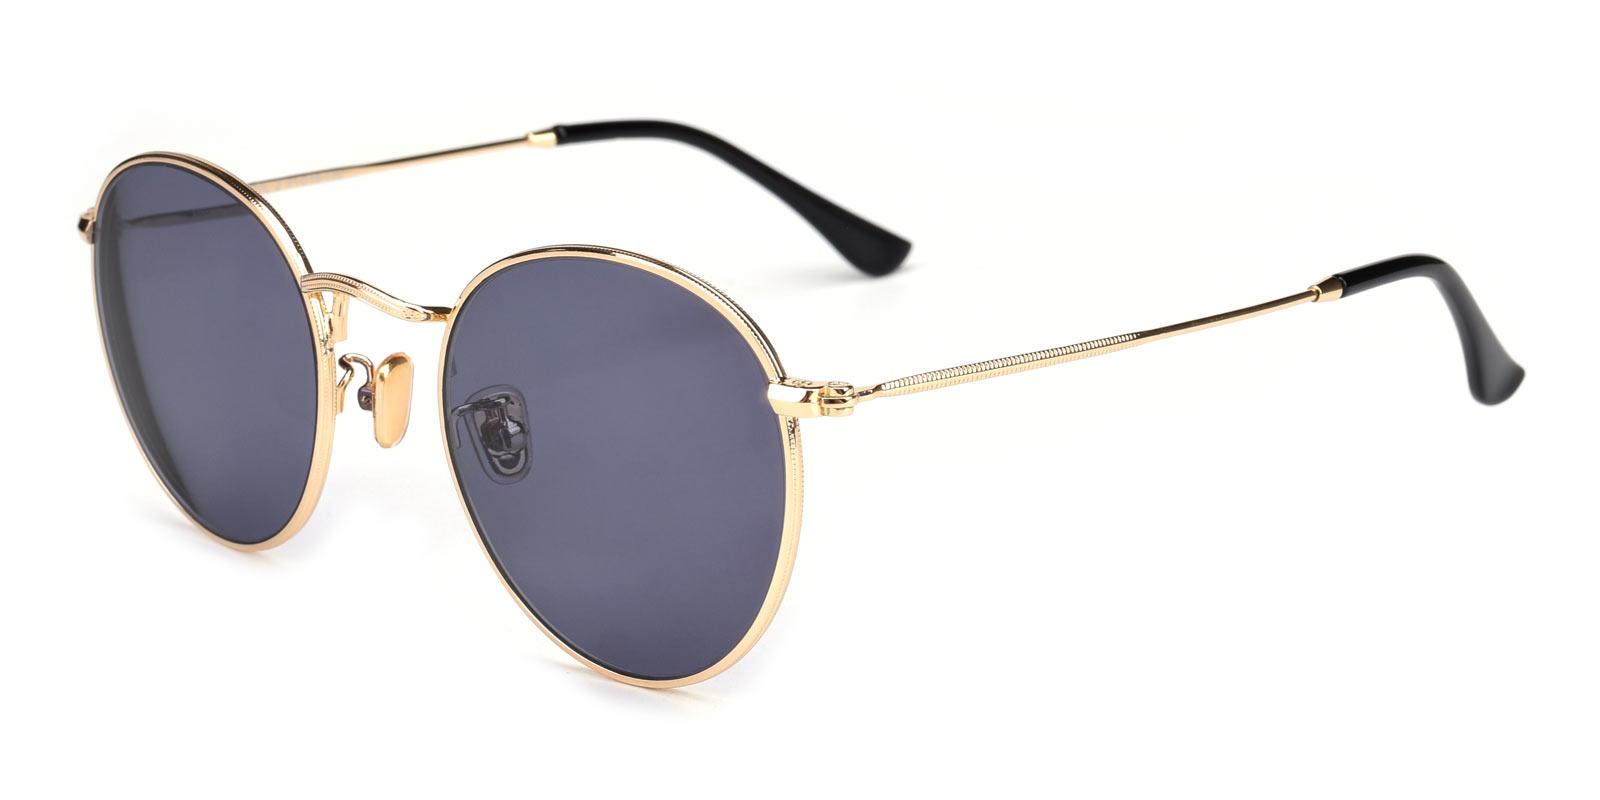 Canary-Gold-Round-Metal-Sunglasses-detail